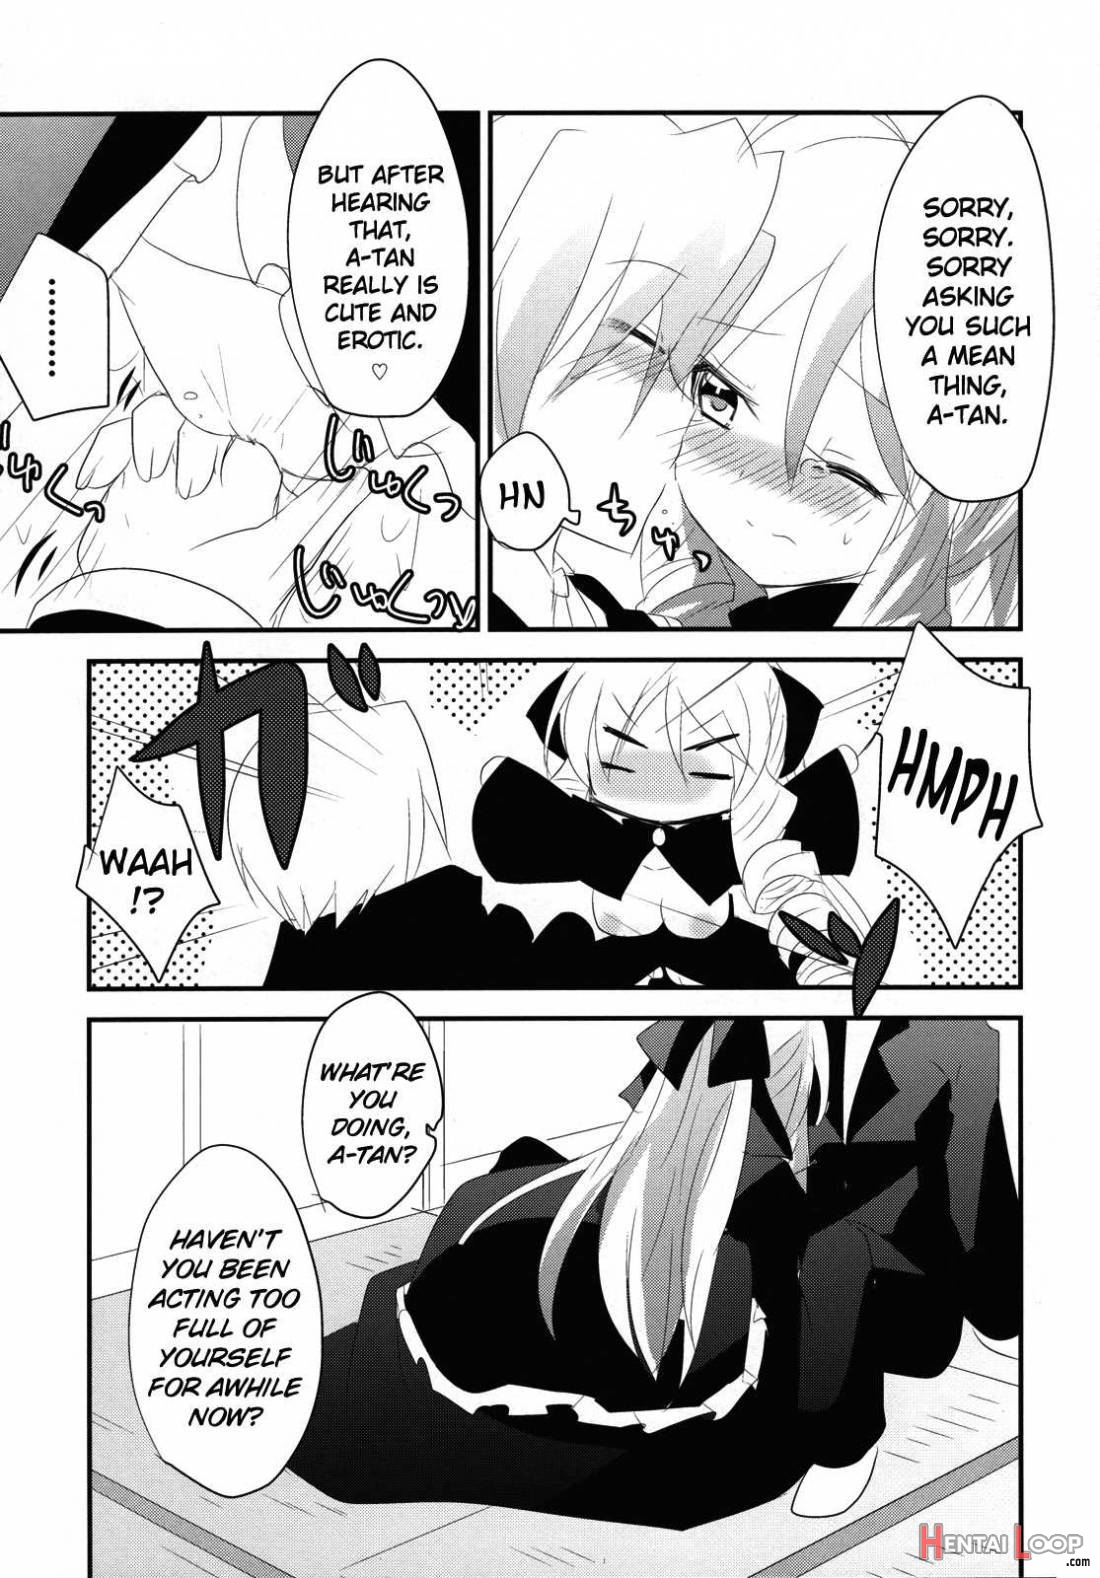 The Simple Work Of Loving A-Tan Alone page 10